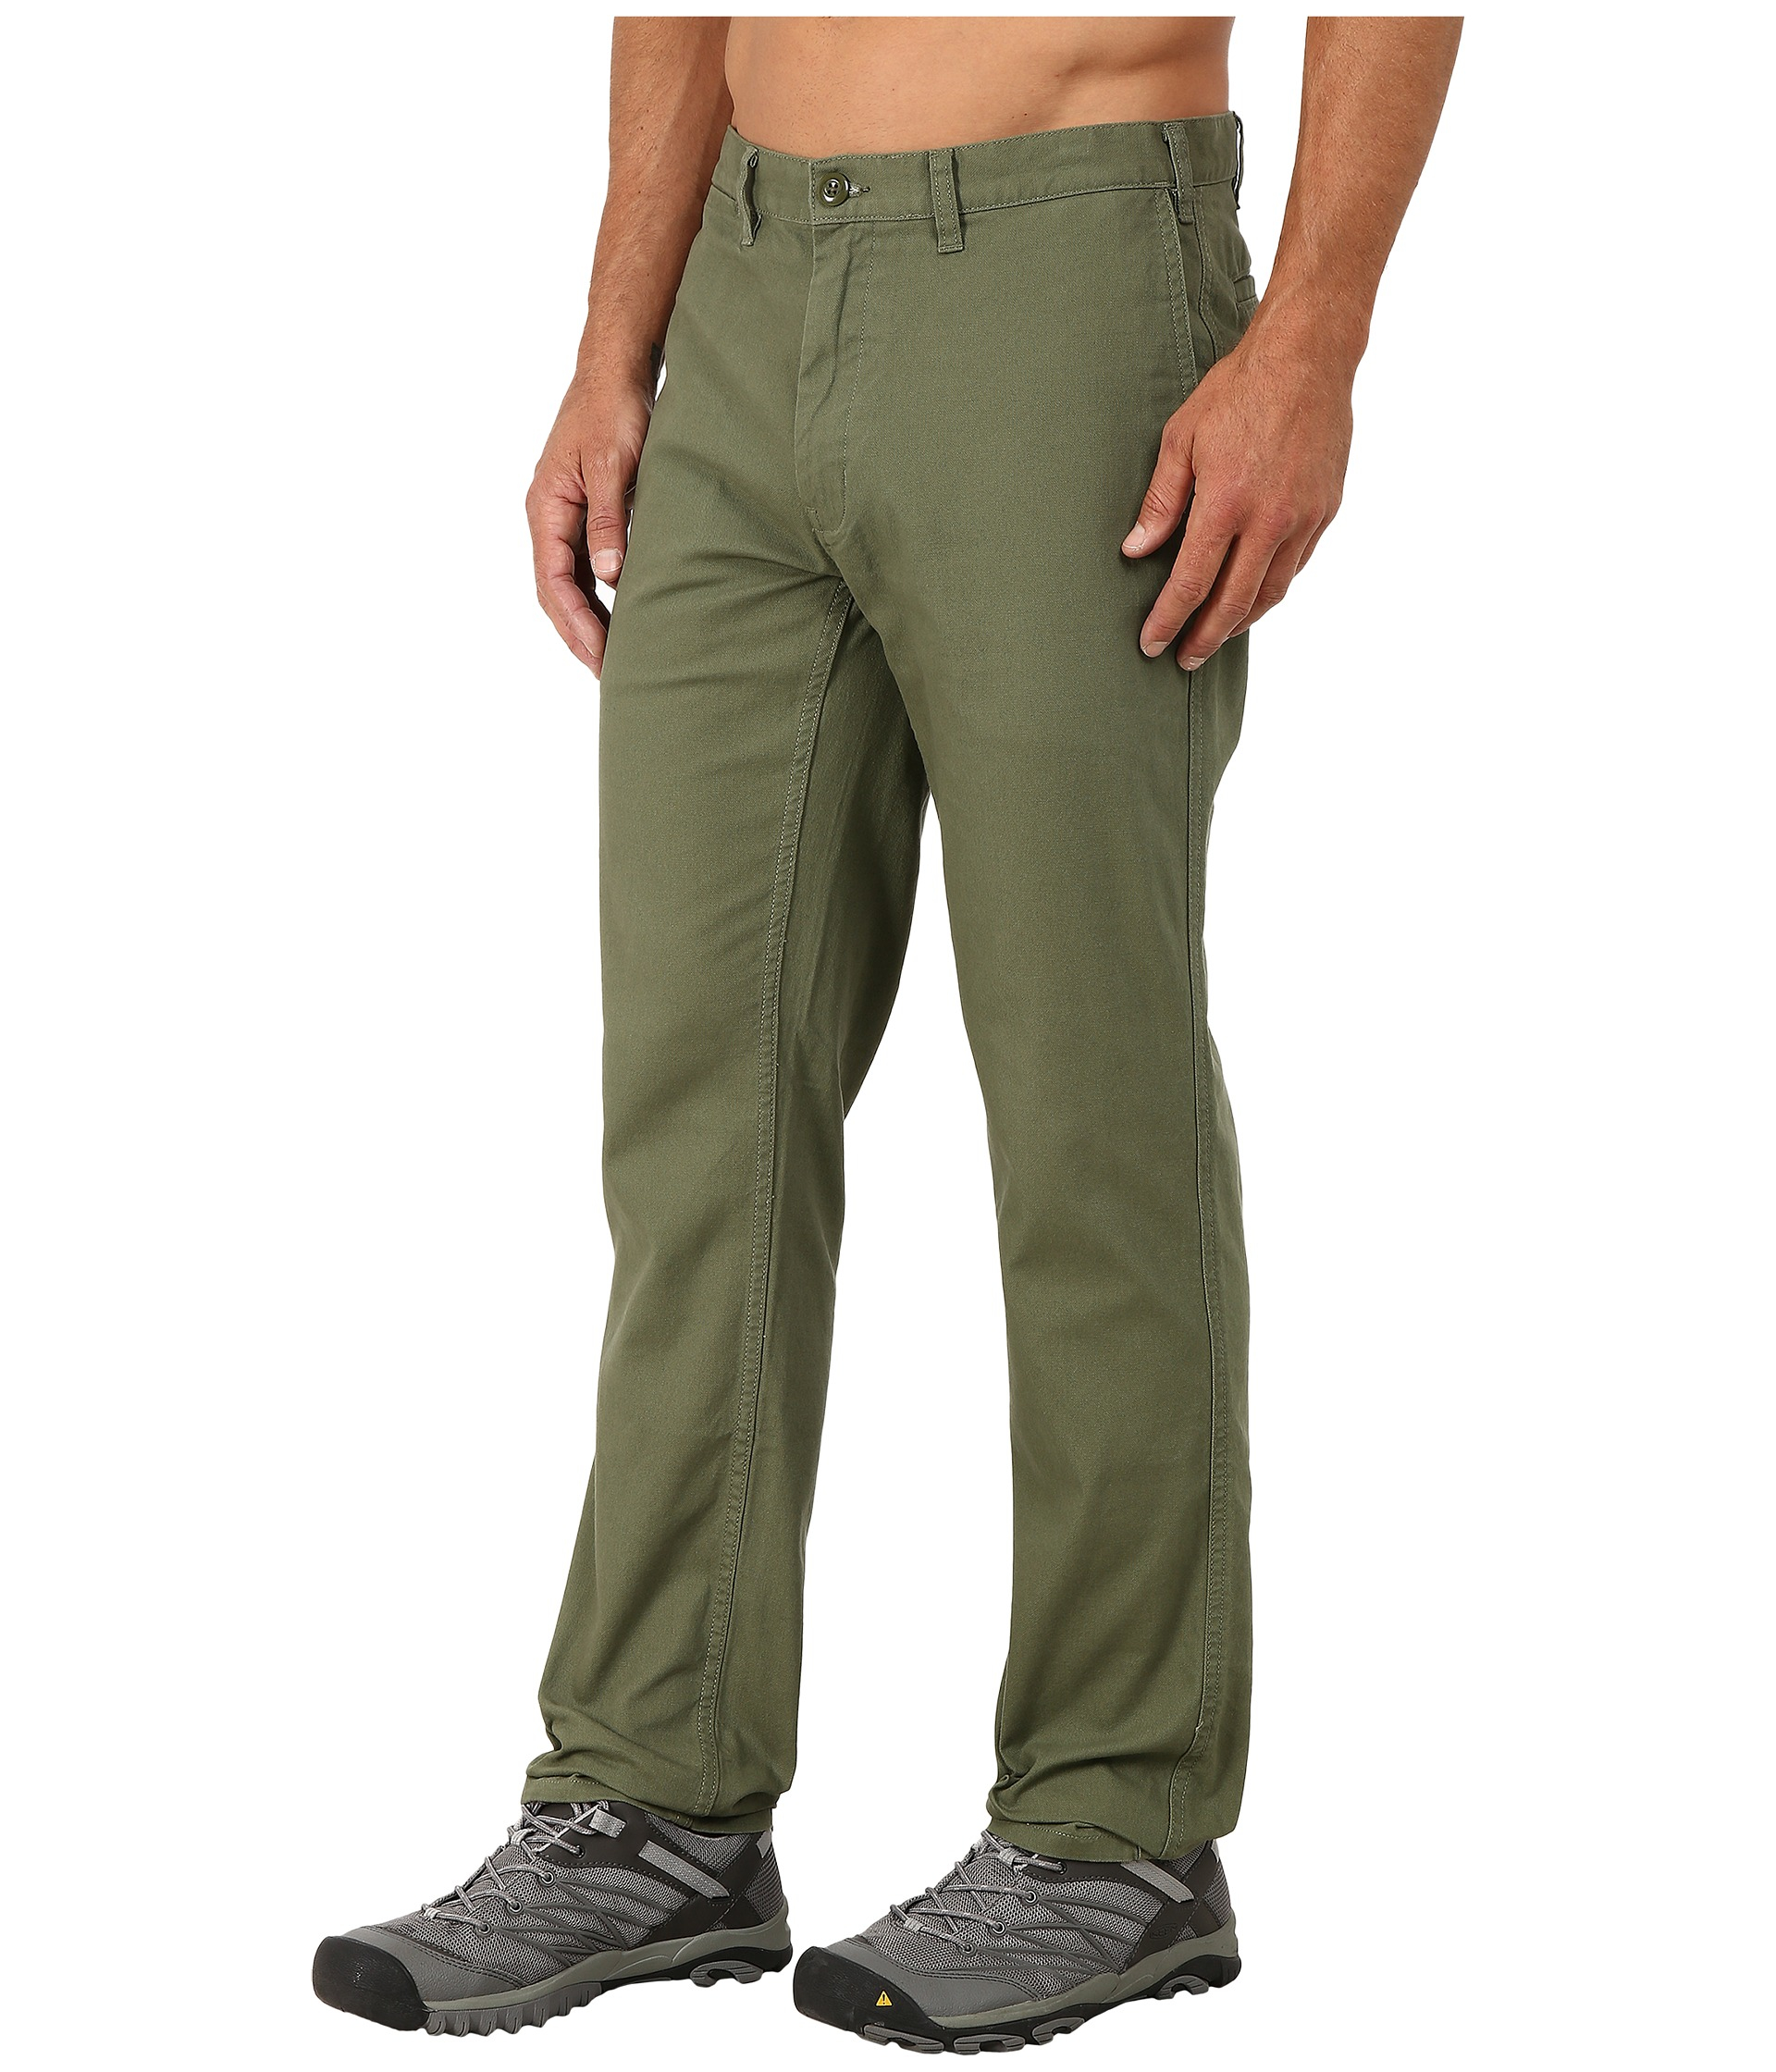 Lyst - Patagonia Straight Fit Duck Pant - Regular in Green for Men